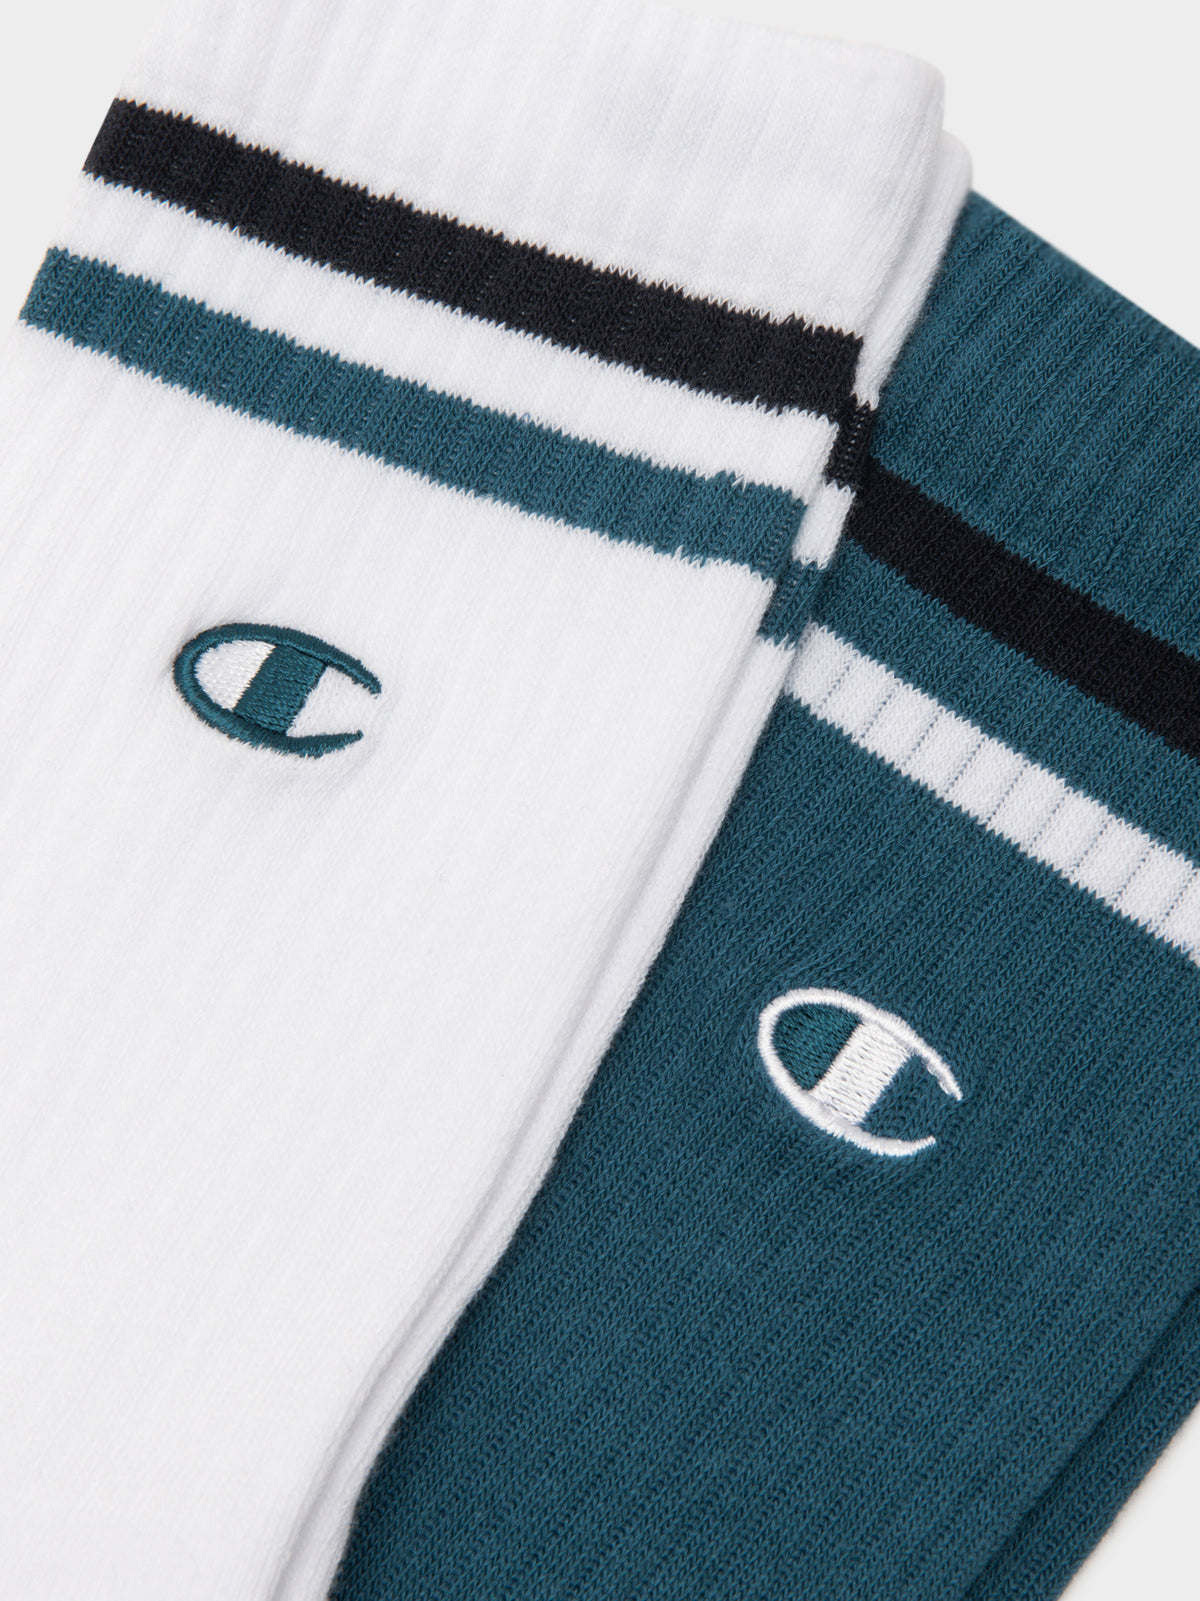 2 Pairs of Branded C Crew Socks in White and Blue